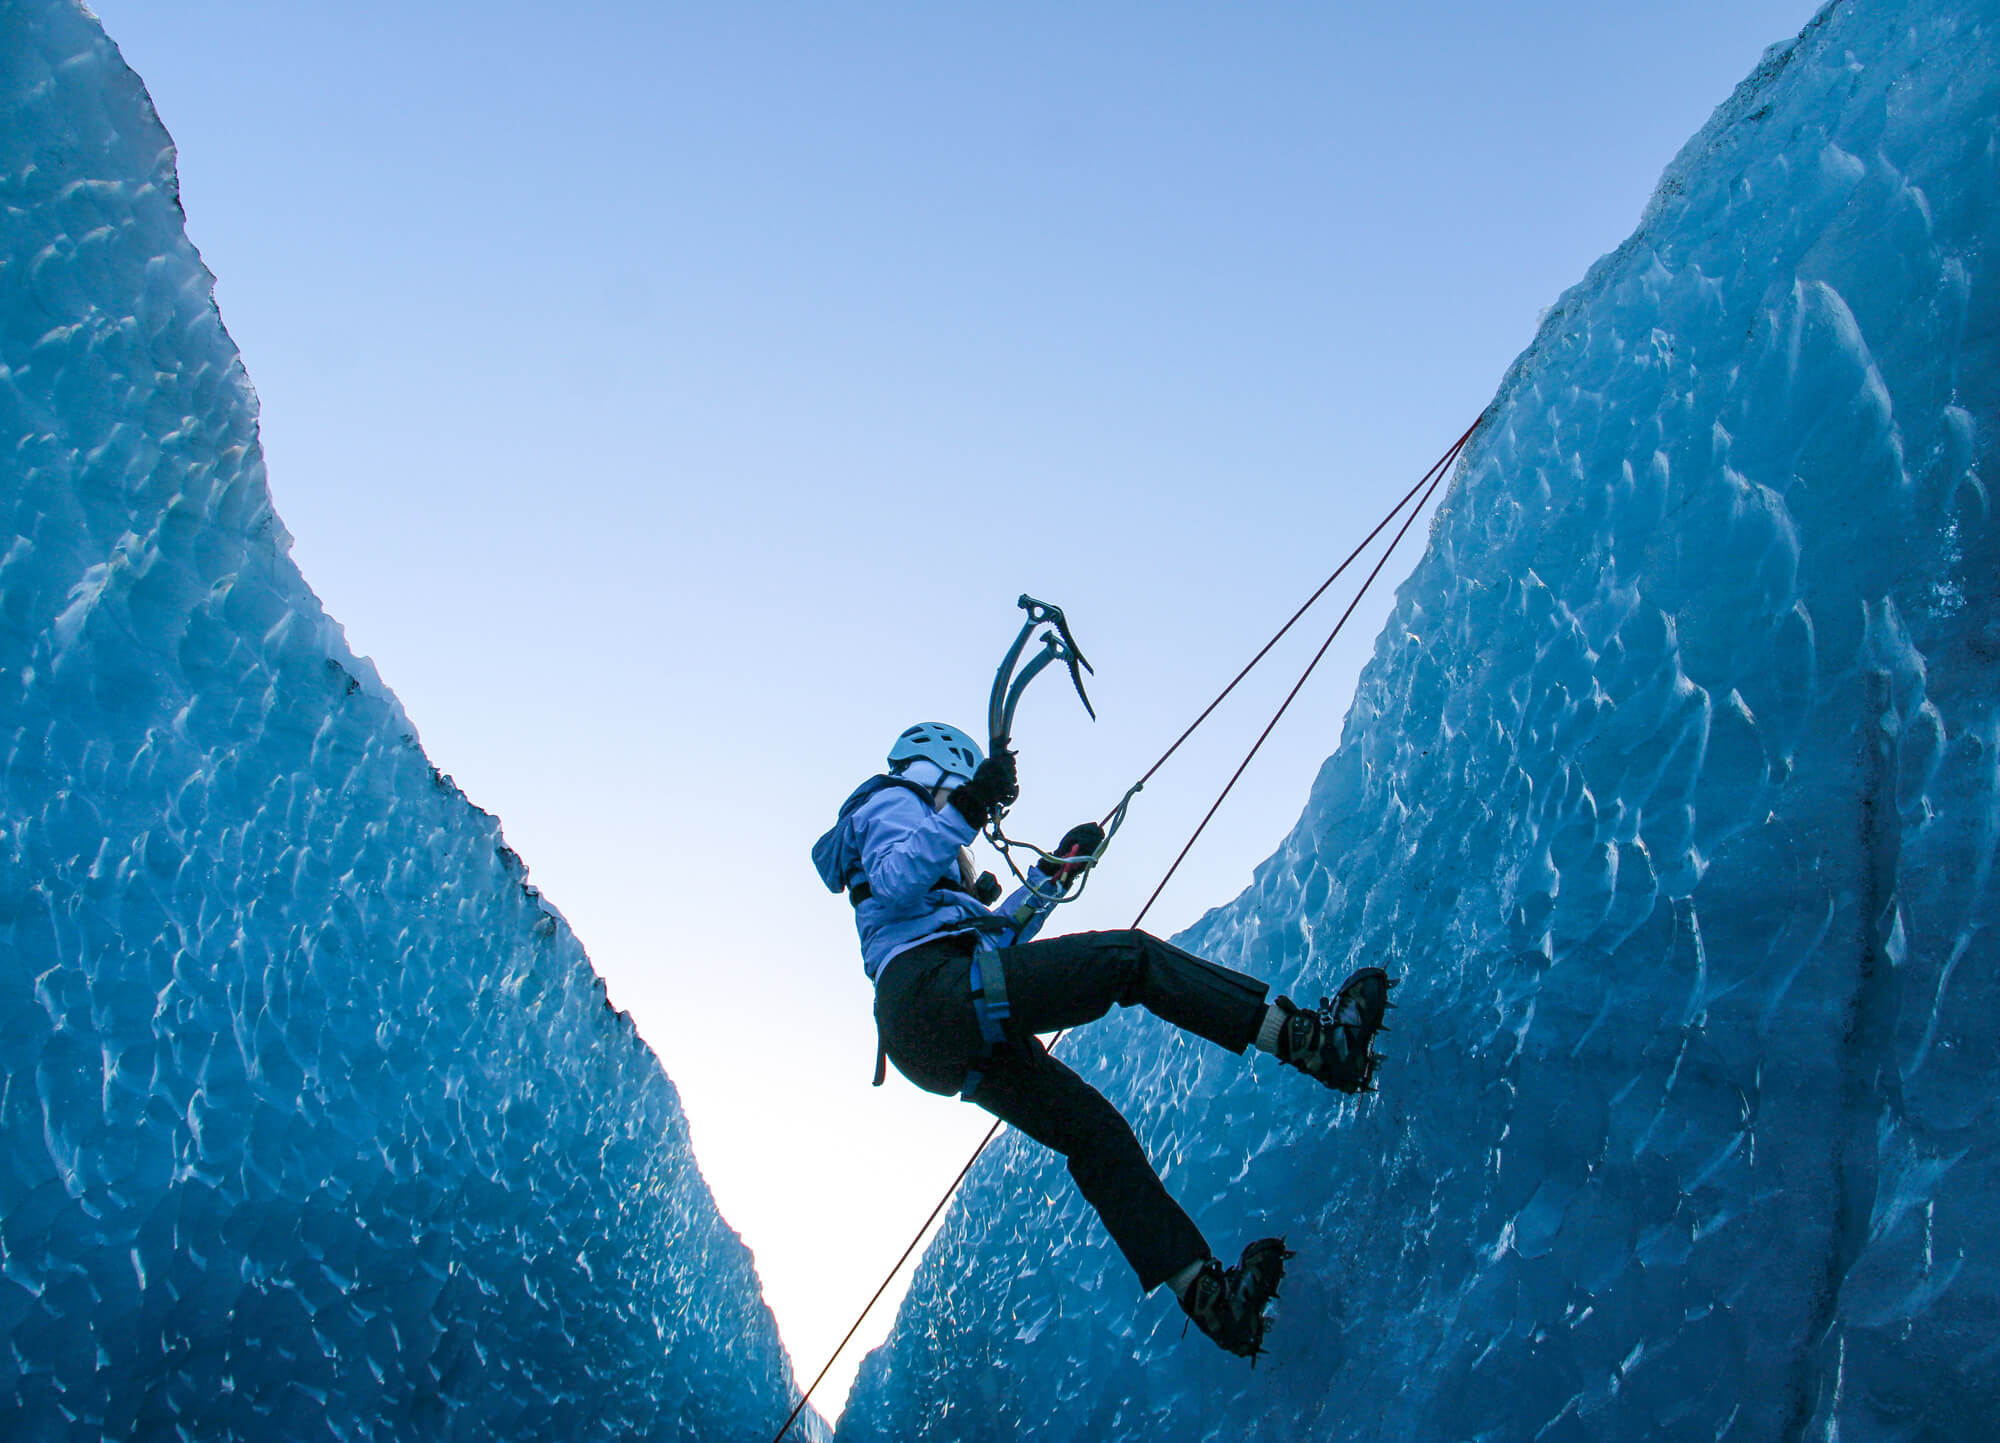 A person wearing climbing gear, including a helmet and crampons, is ice climbing between two tall ice walls. They are using ice axes and are secured by ropes. The sky in the background is clear and bright.